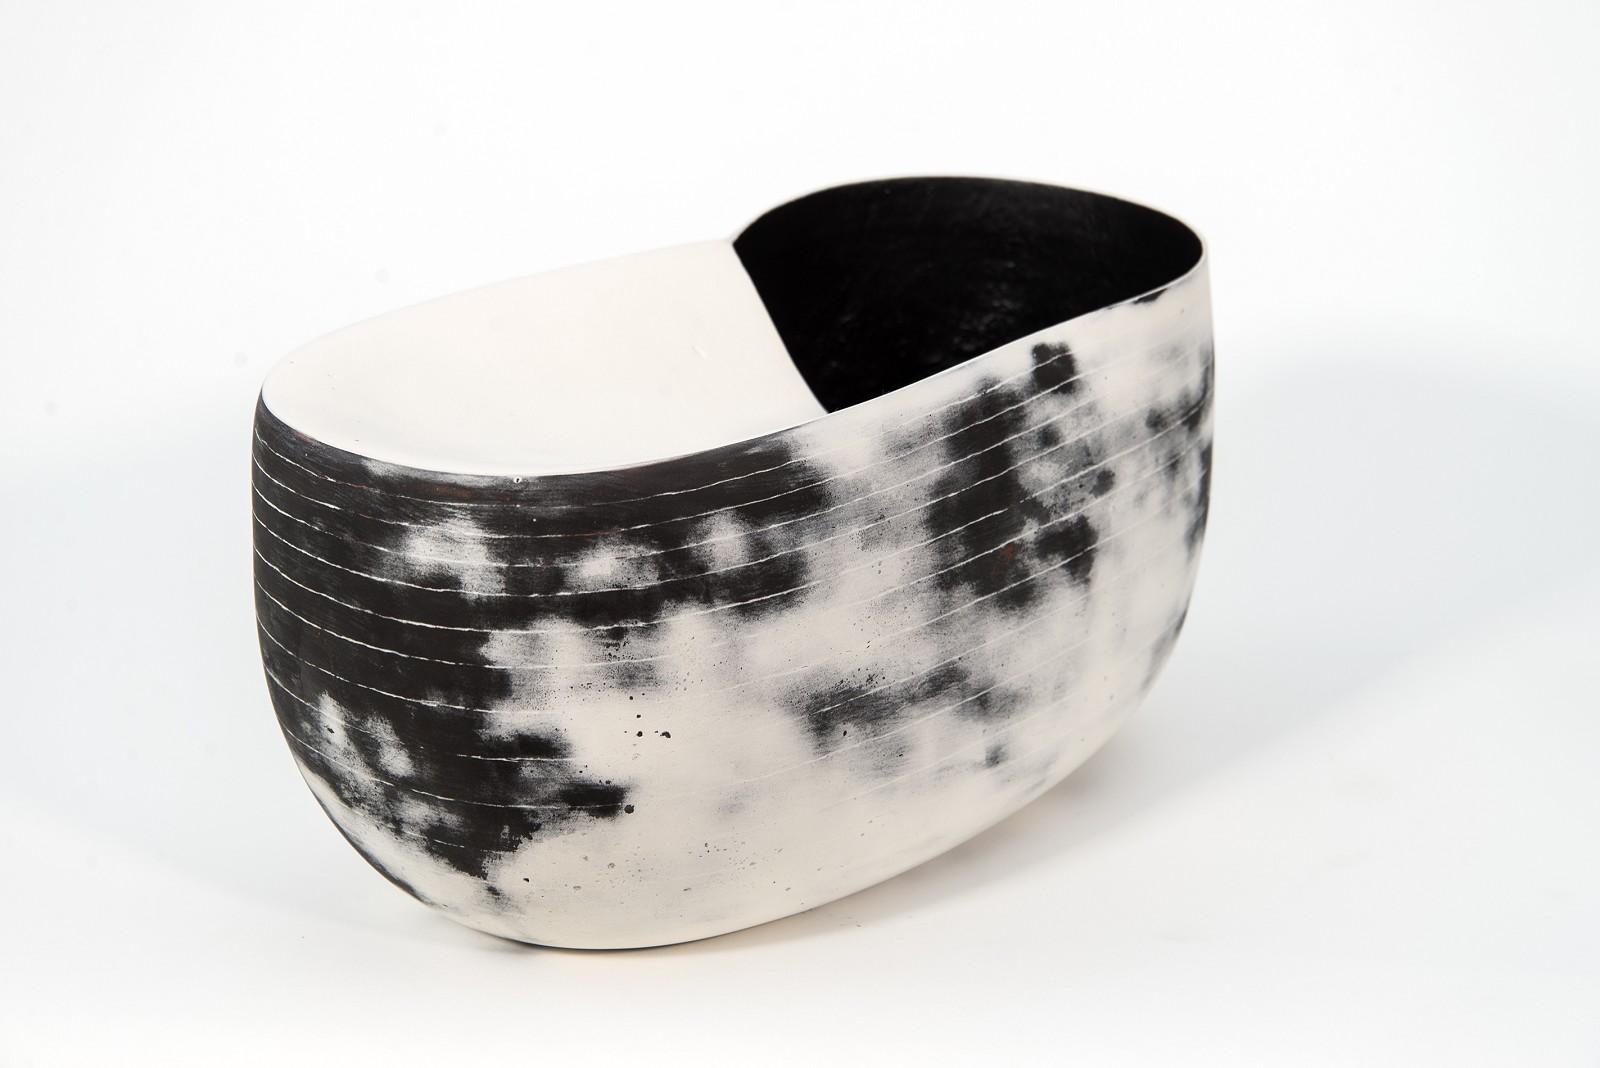 Borealis - black and white, nature inspired, elongated, ceramic, tabletop vessel - Sculpture by Steven Heinemann